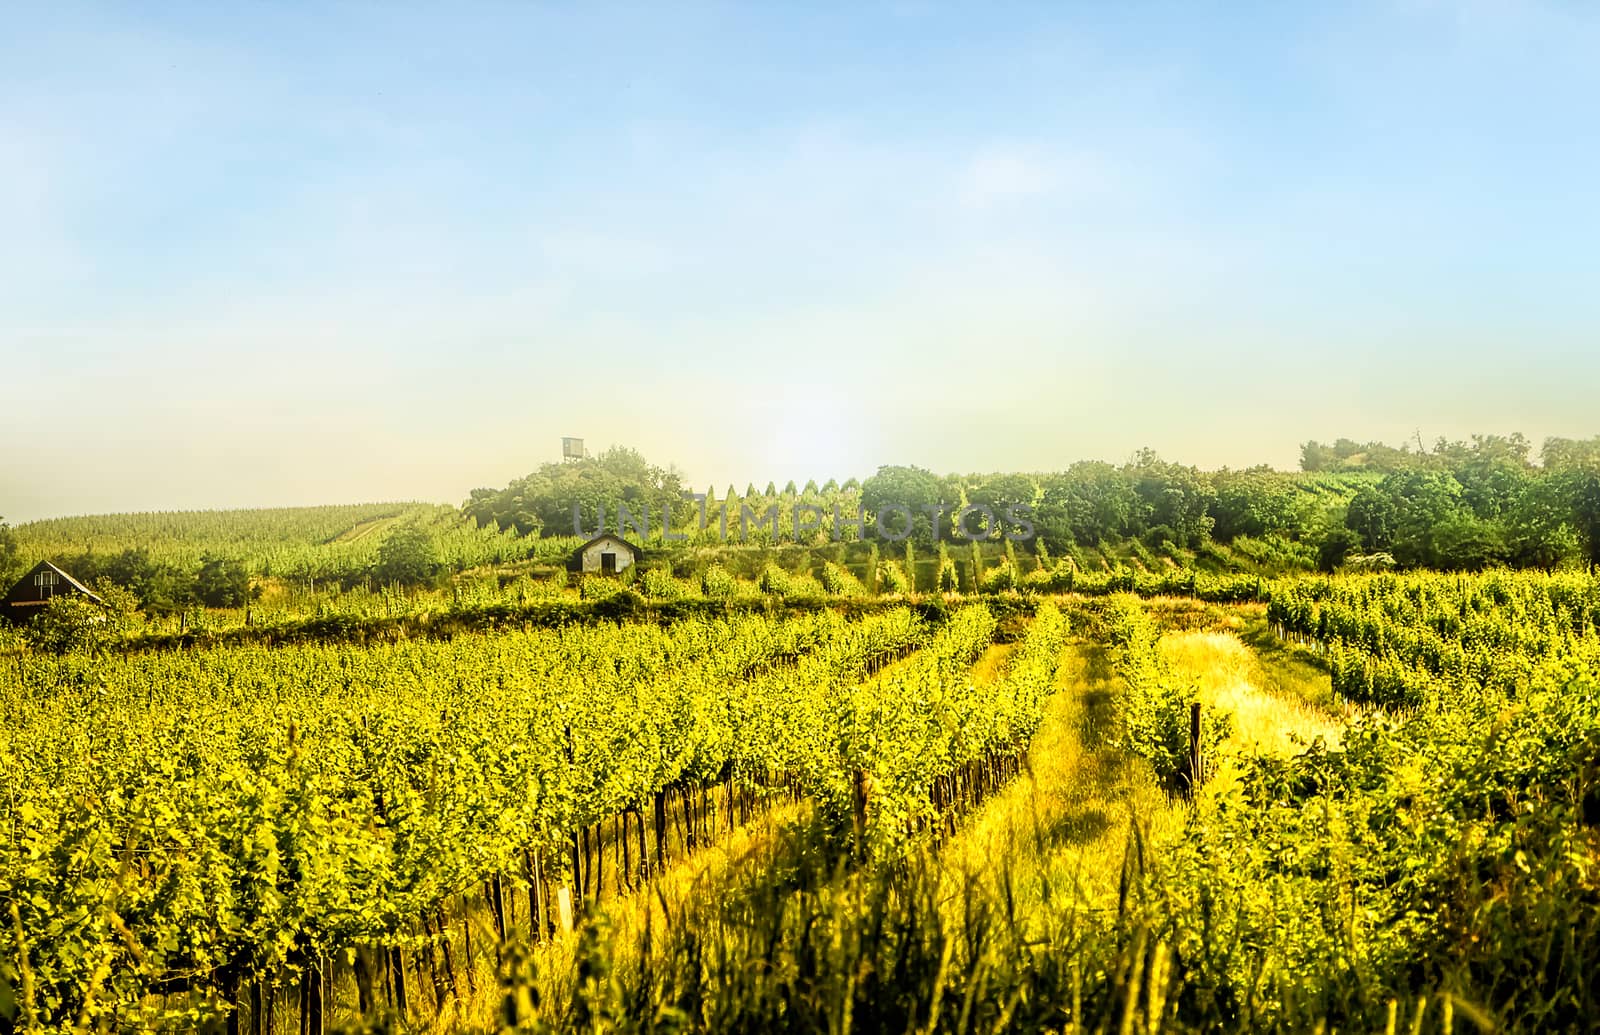 Vineyard hills of the city of Vienna at sunset by MysteryShot